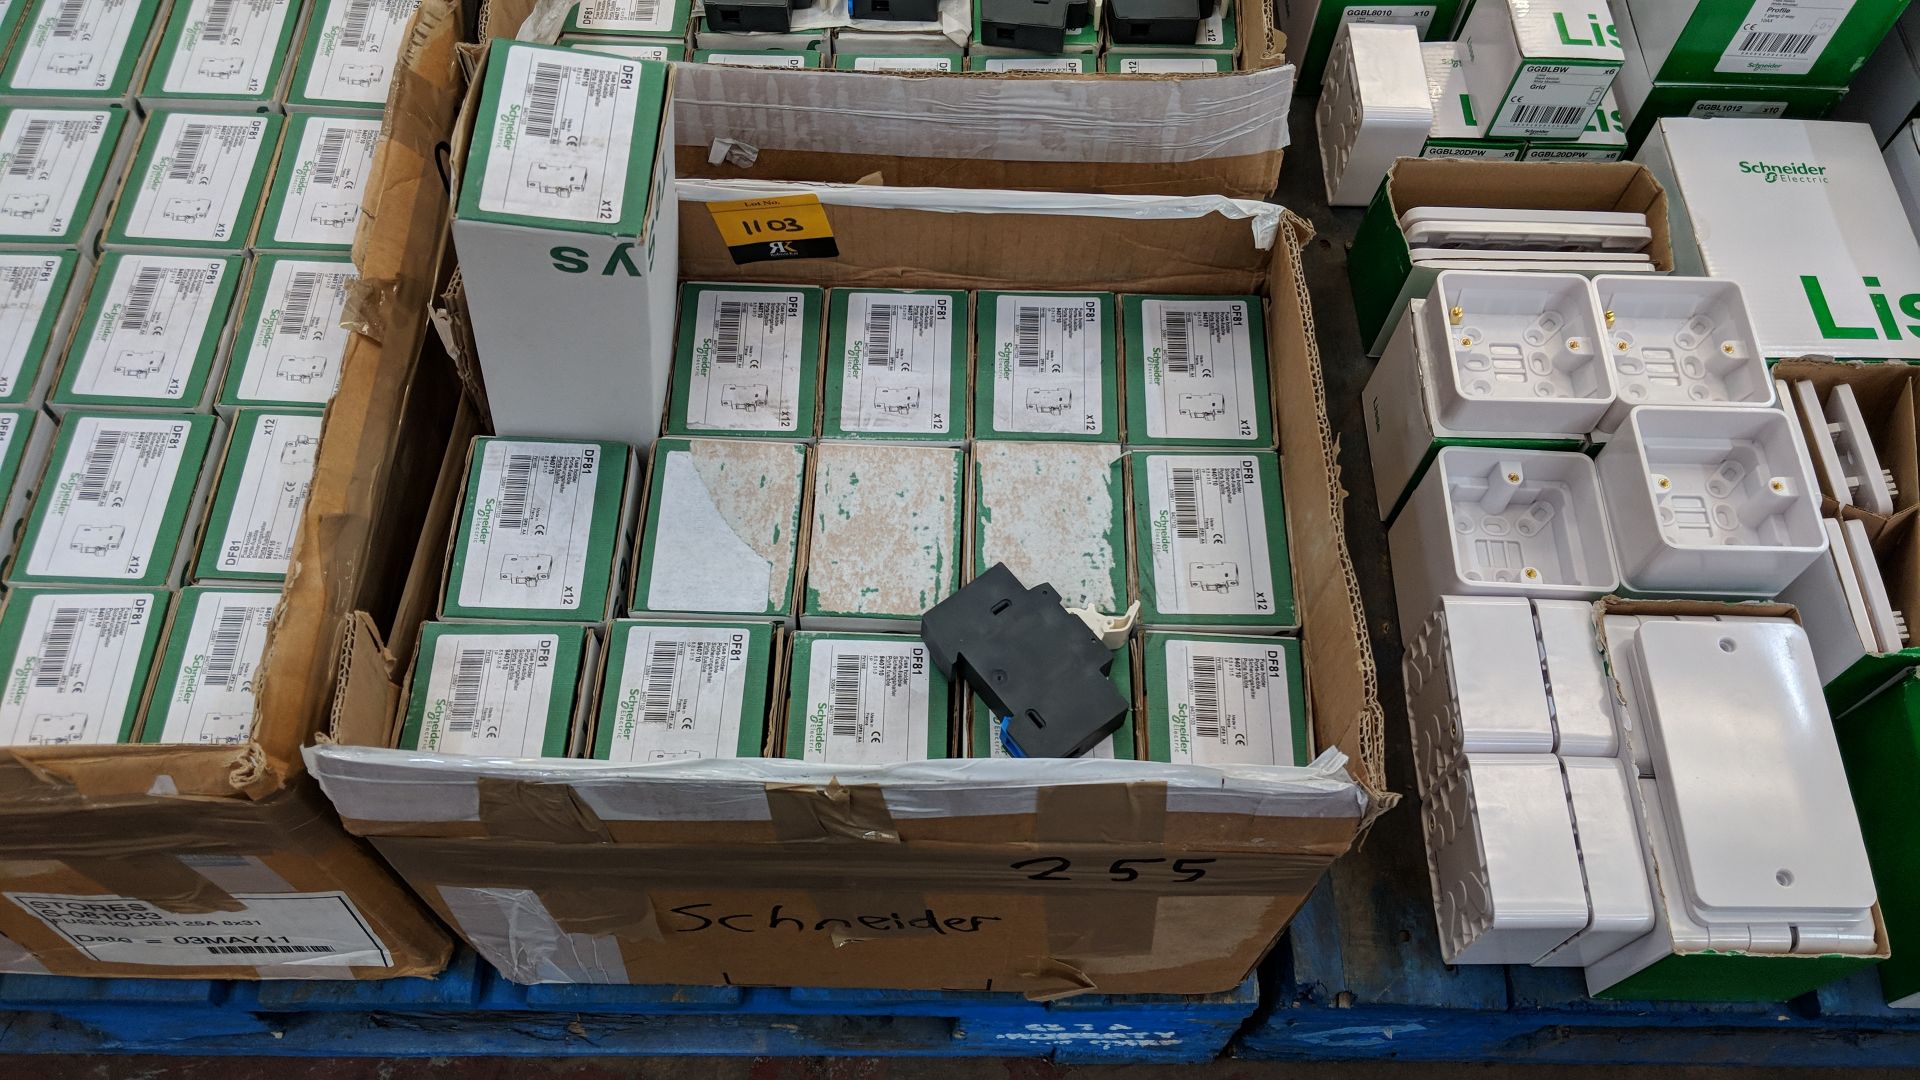 Approx. 180 off Schneider Electric fuse holders The vast majority of products in this auction appear